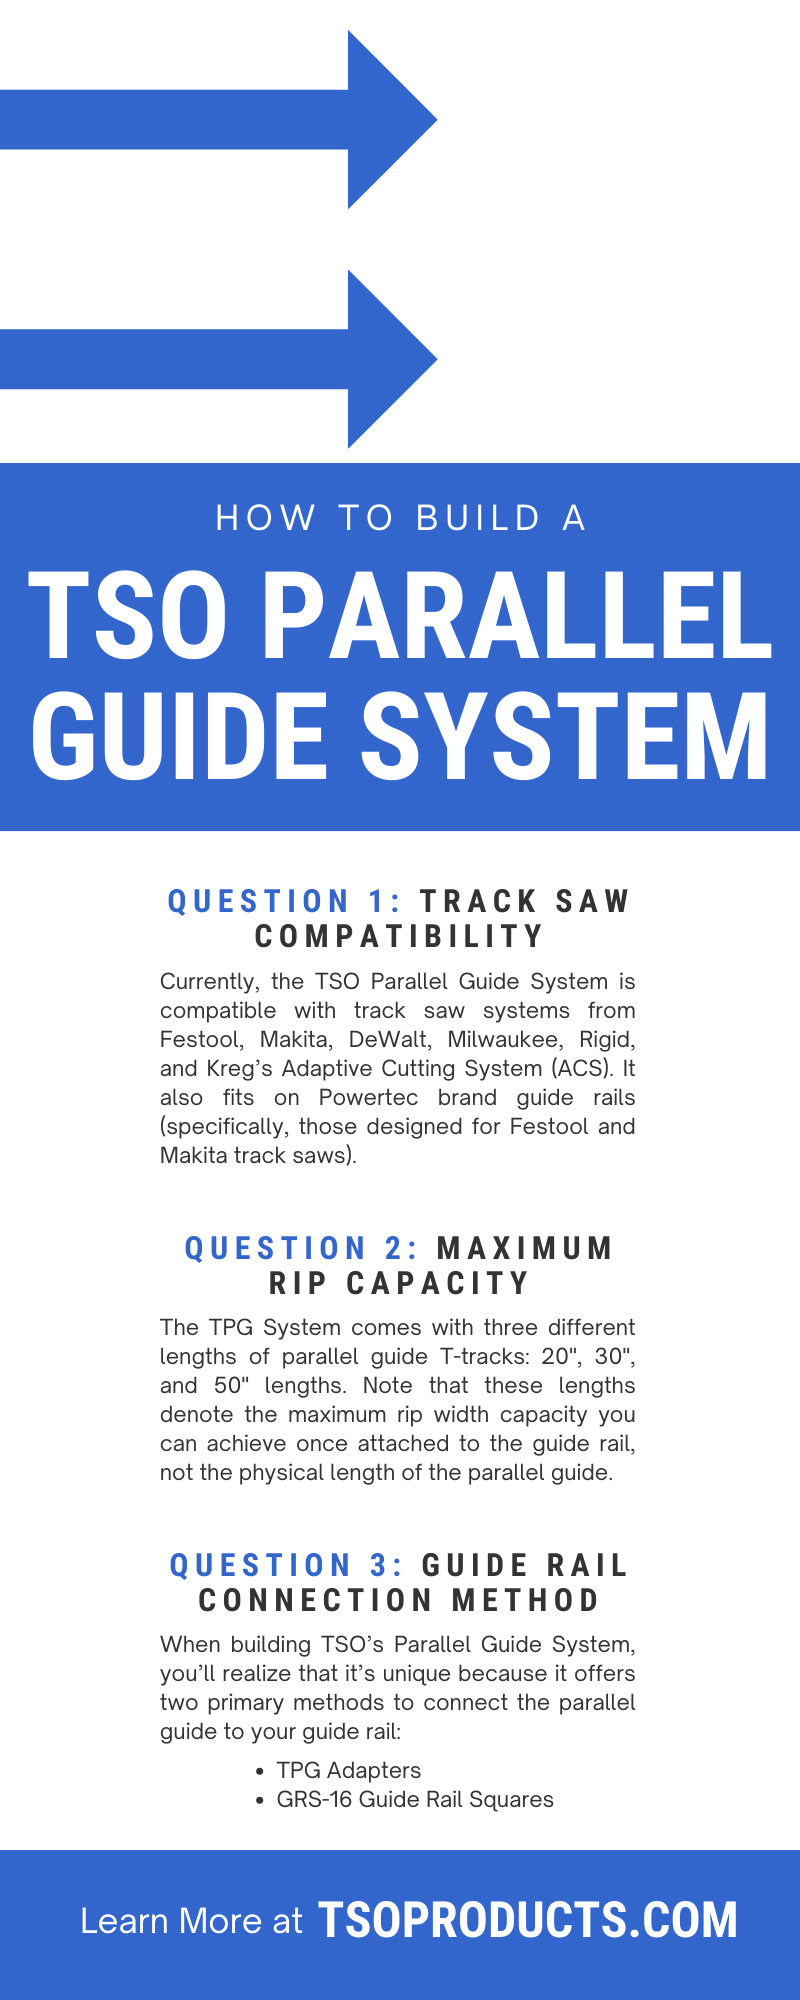 How To Build a TSO Parallel Guide System